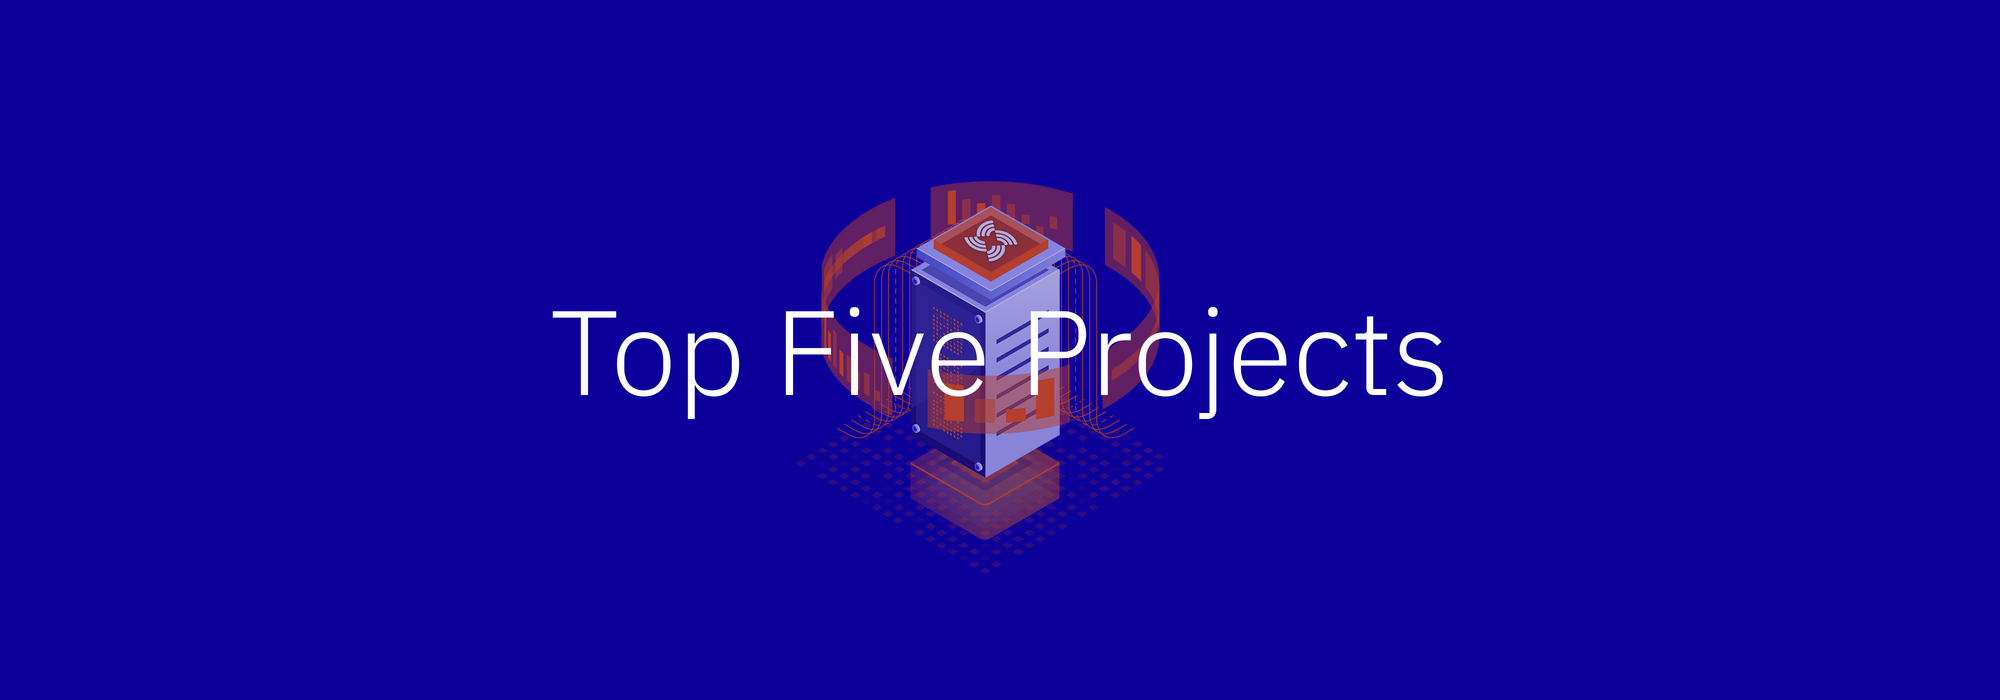 Meet the Top 5 projects from the Streamr Data Challenge